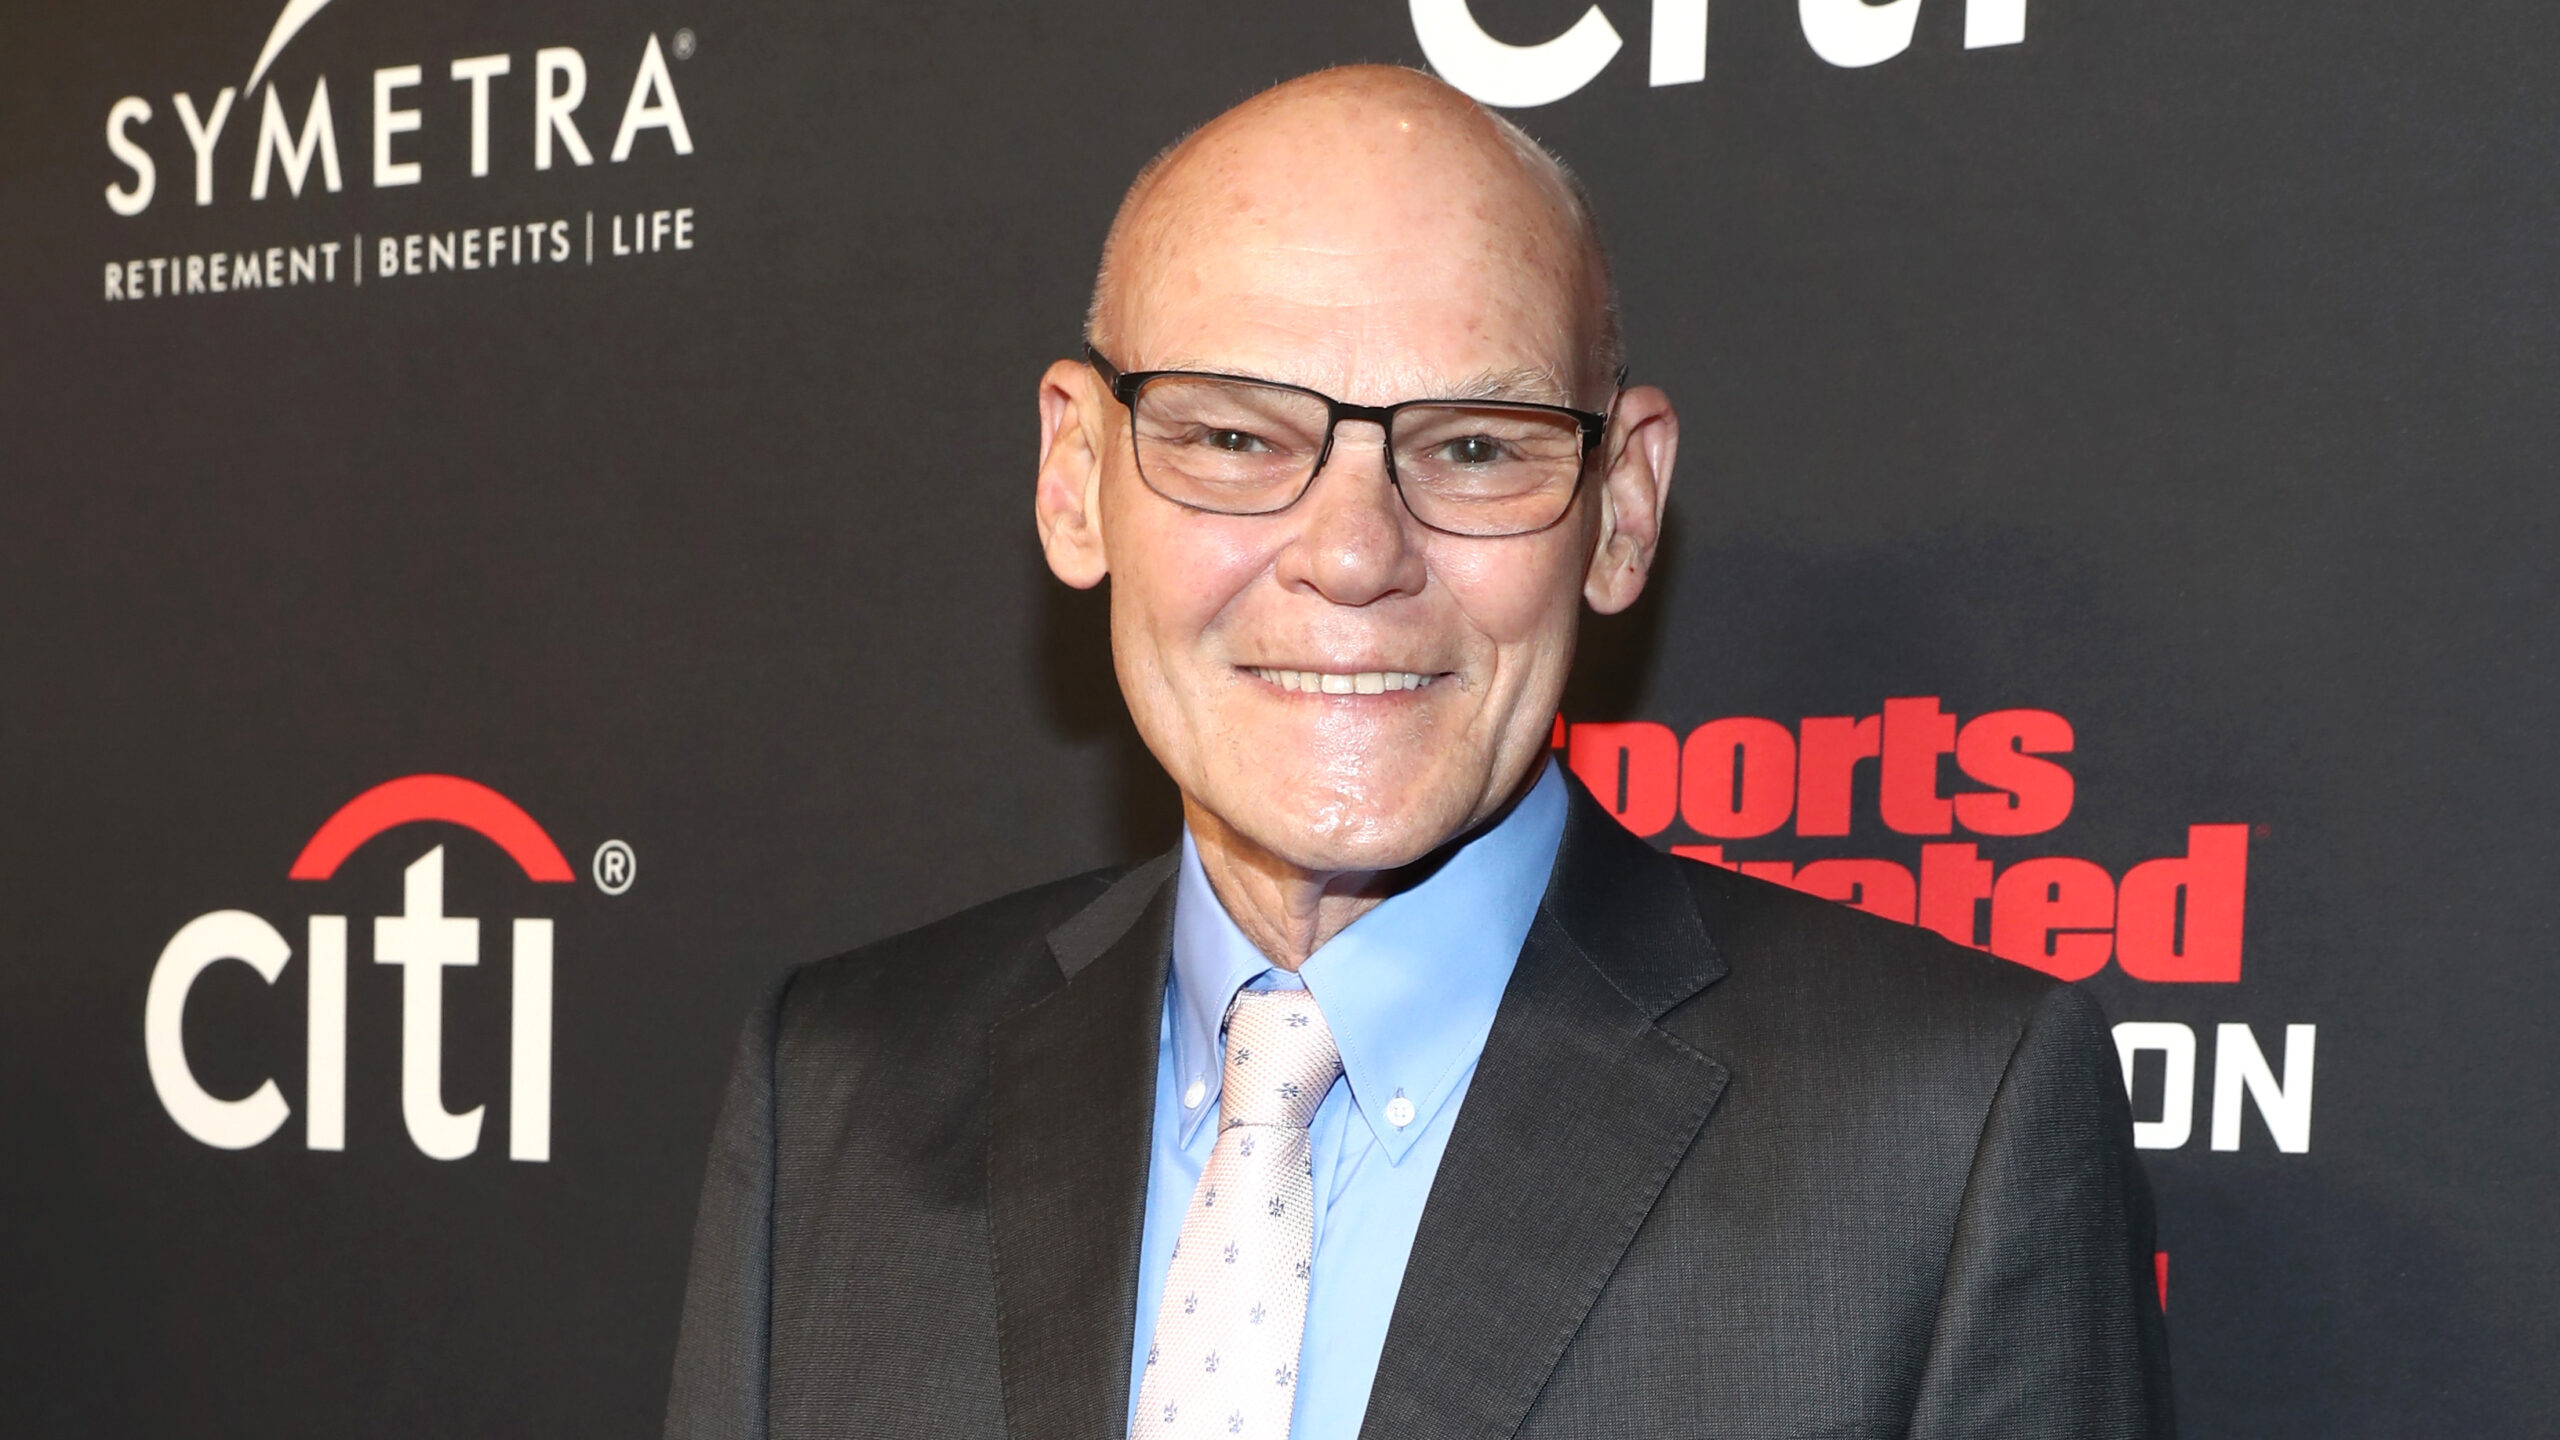 Democratic strategist Carville expressed concern over the alarming statistics among young men in our party